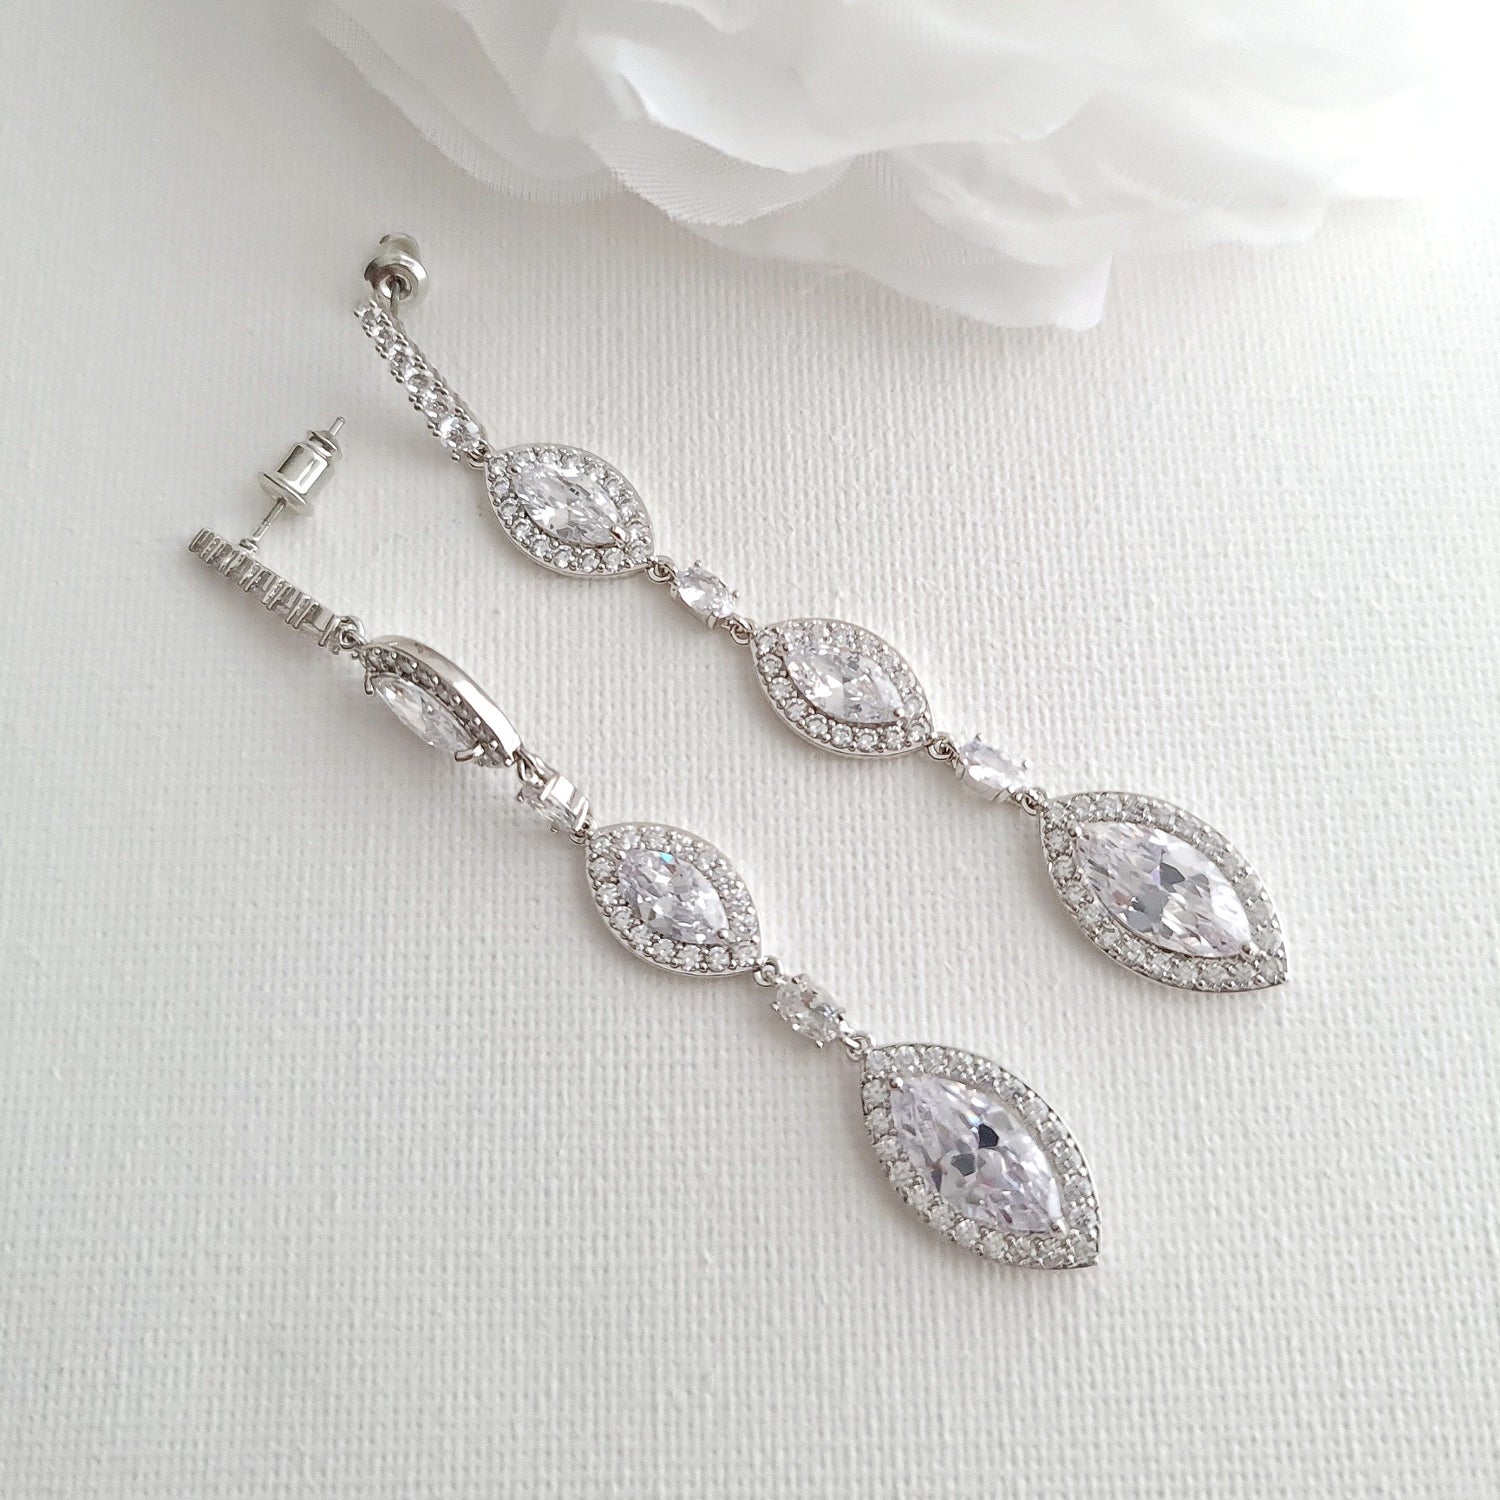 Extra Long Earrings for Wedding and Prom-Poetry Design